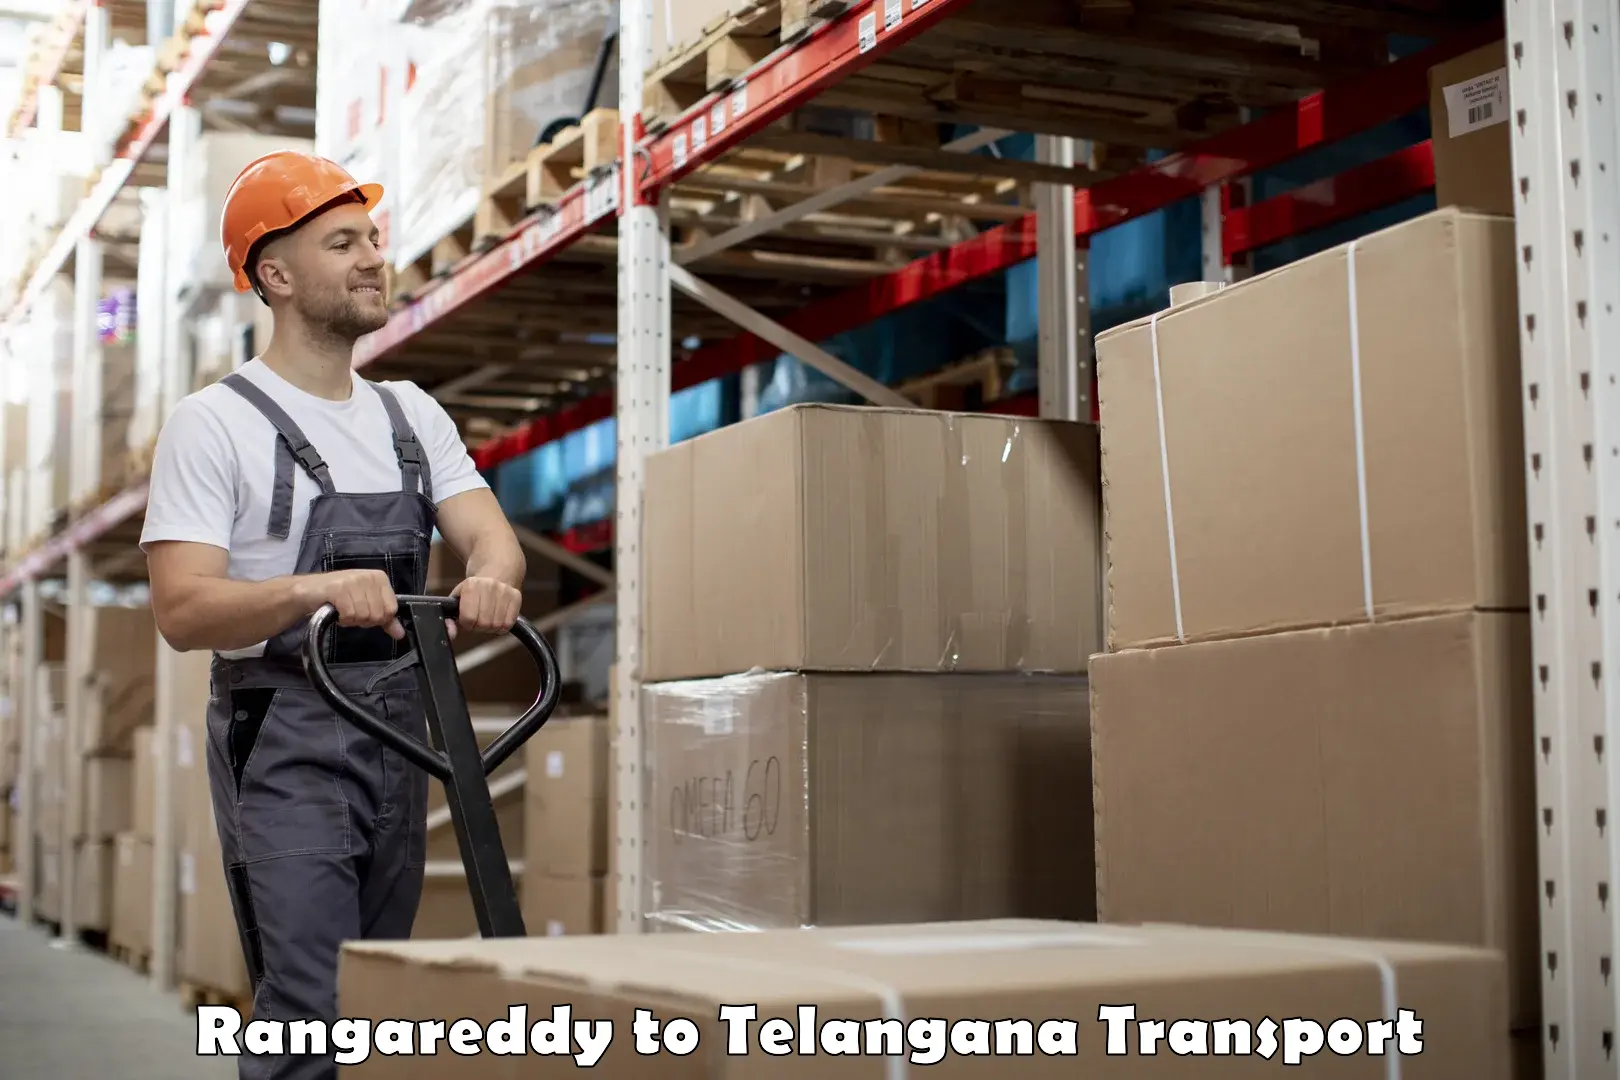 Goods delivery service Rangareddy to Hyderabad